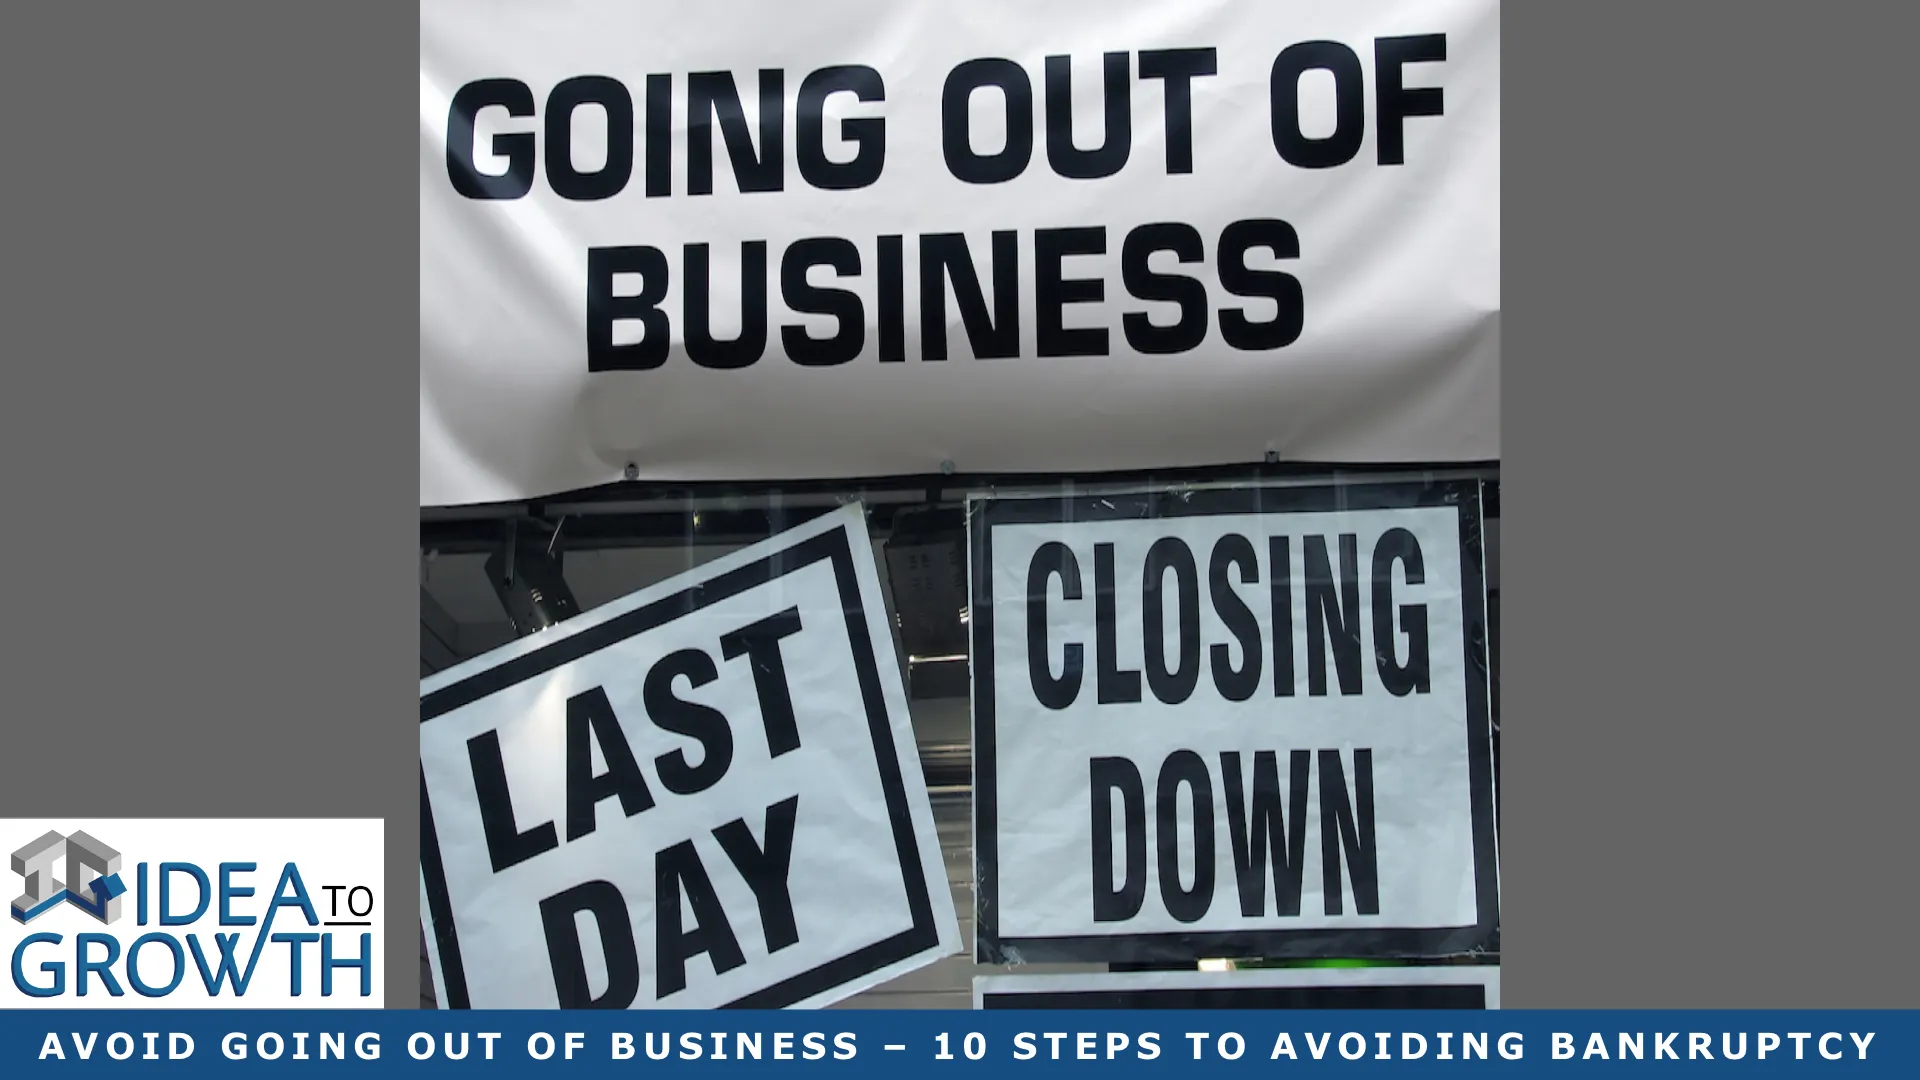 AVOID GOING OUT OF BUSINESS – 10 STEPS TO AVOIDING BANKRUPTCY